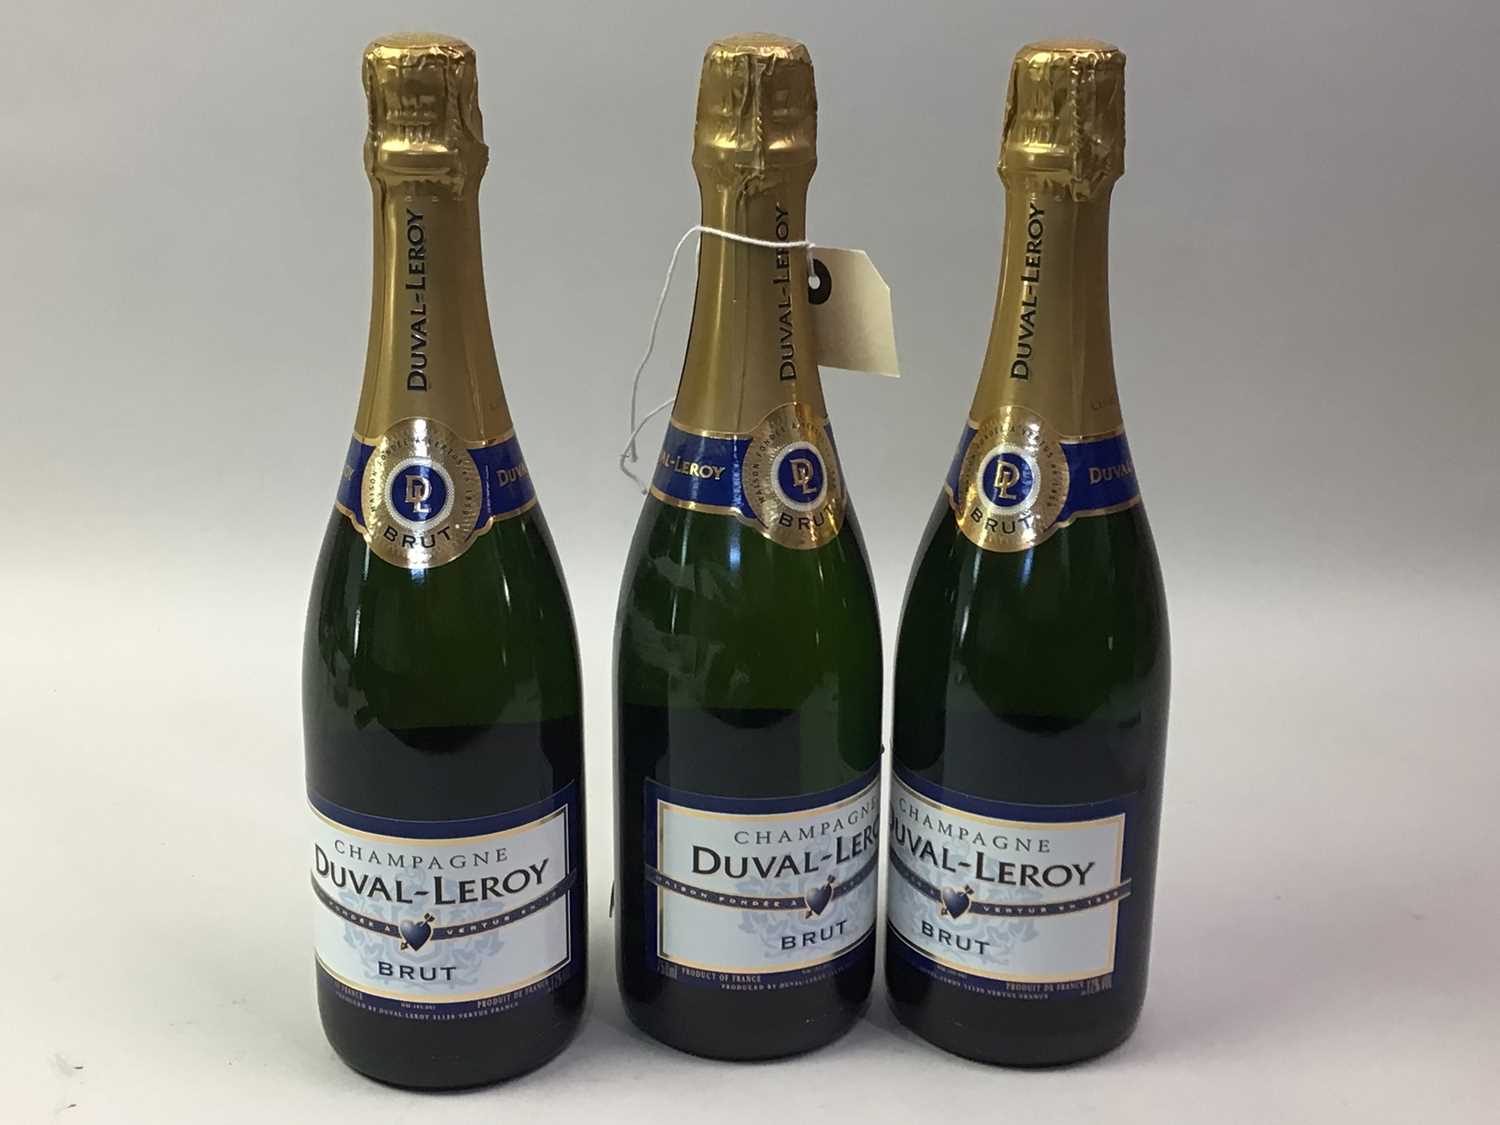 SIX DUVAL-LEROY BRUT, CHAMPAGNE - Image 2 of 2